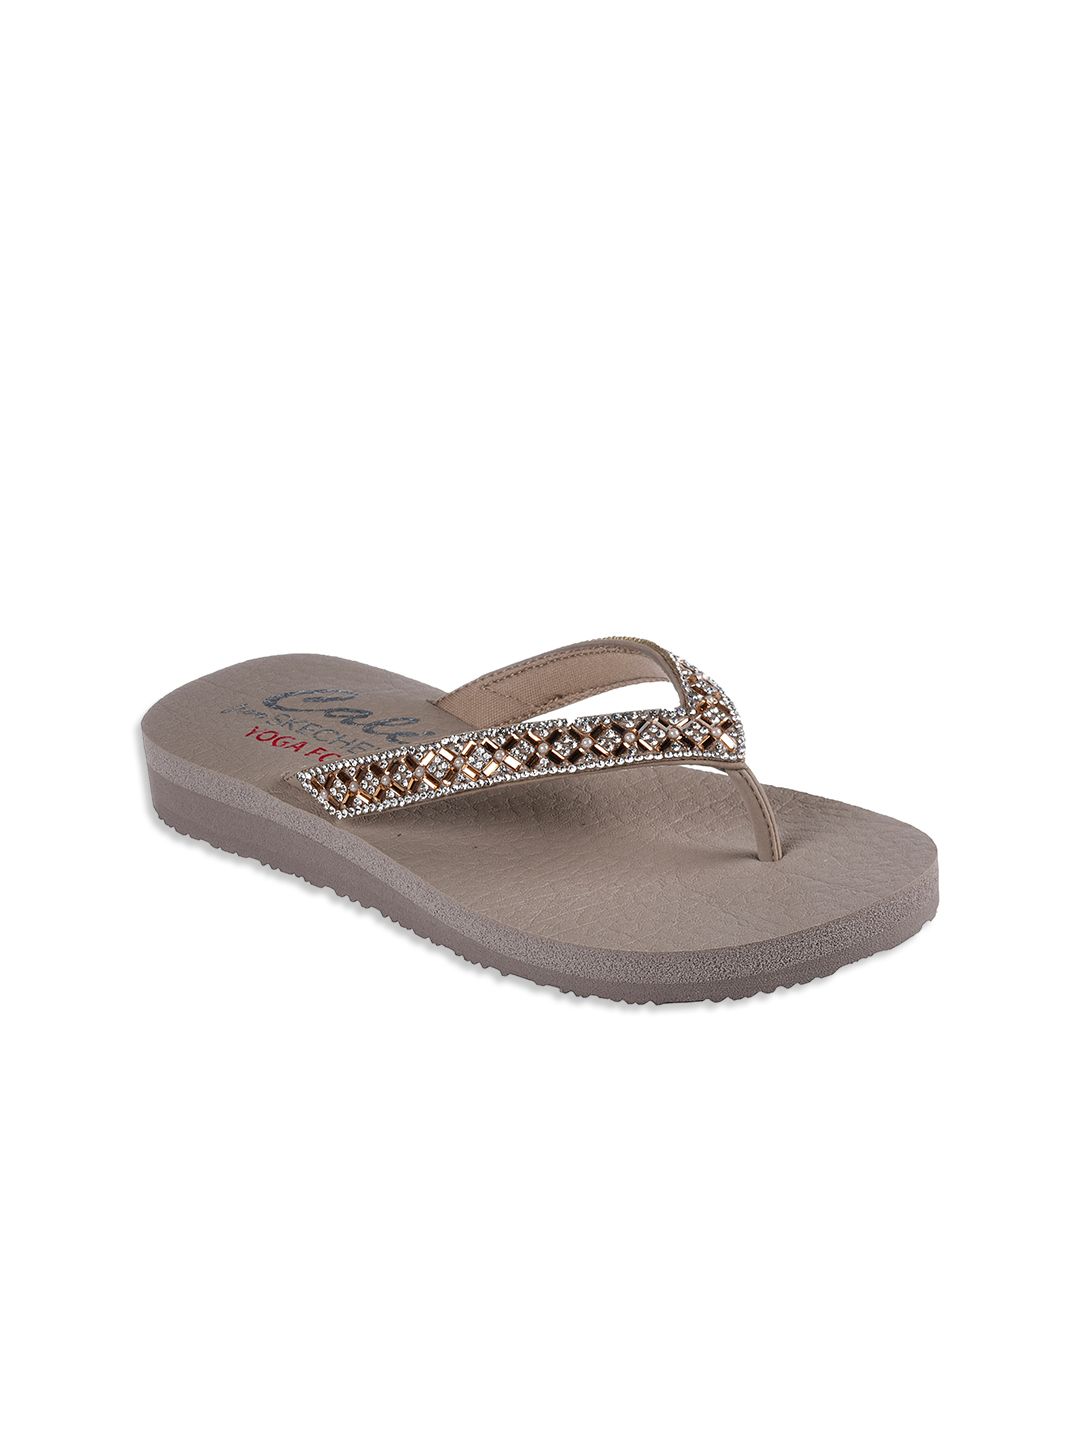 Skechers Women Brown & Silver-Toned Embellished Thong Flip-Flops Price in India